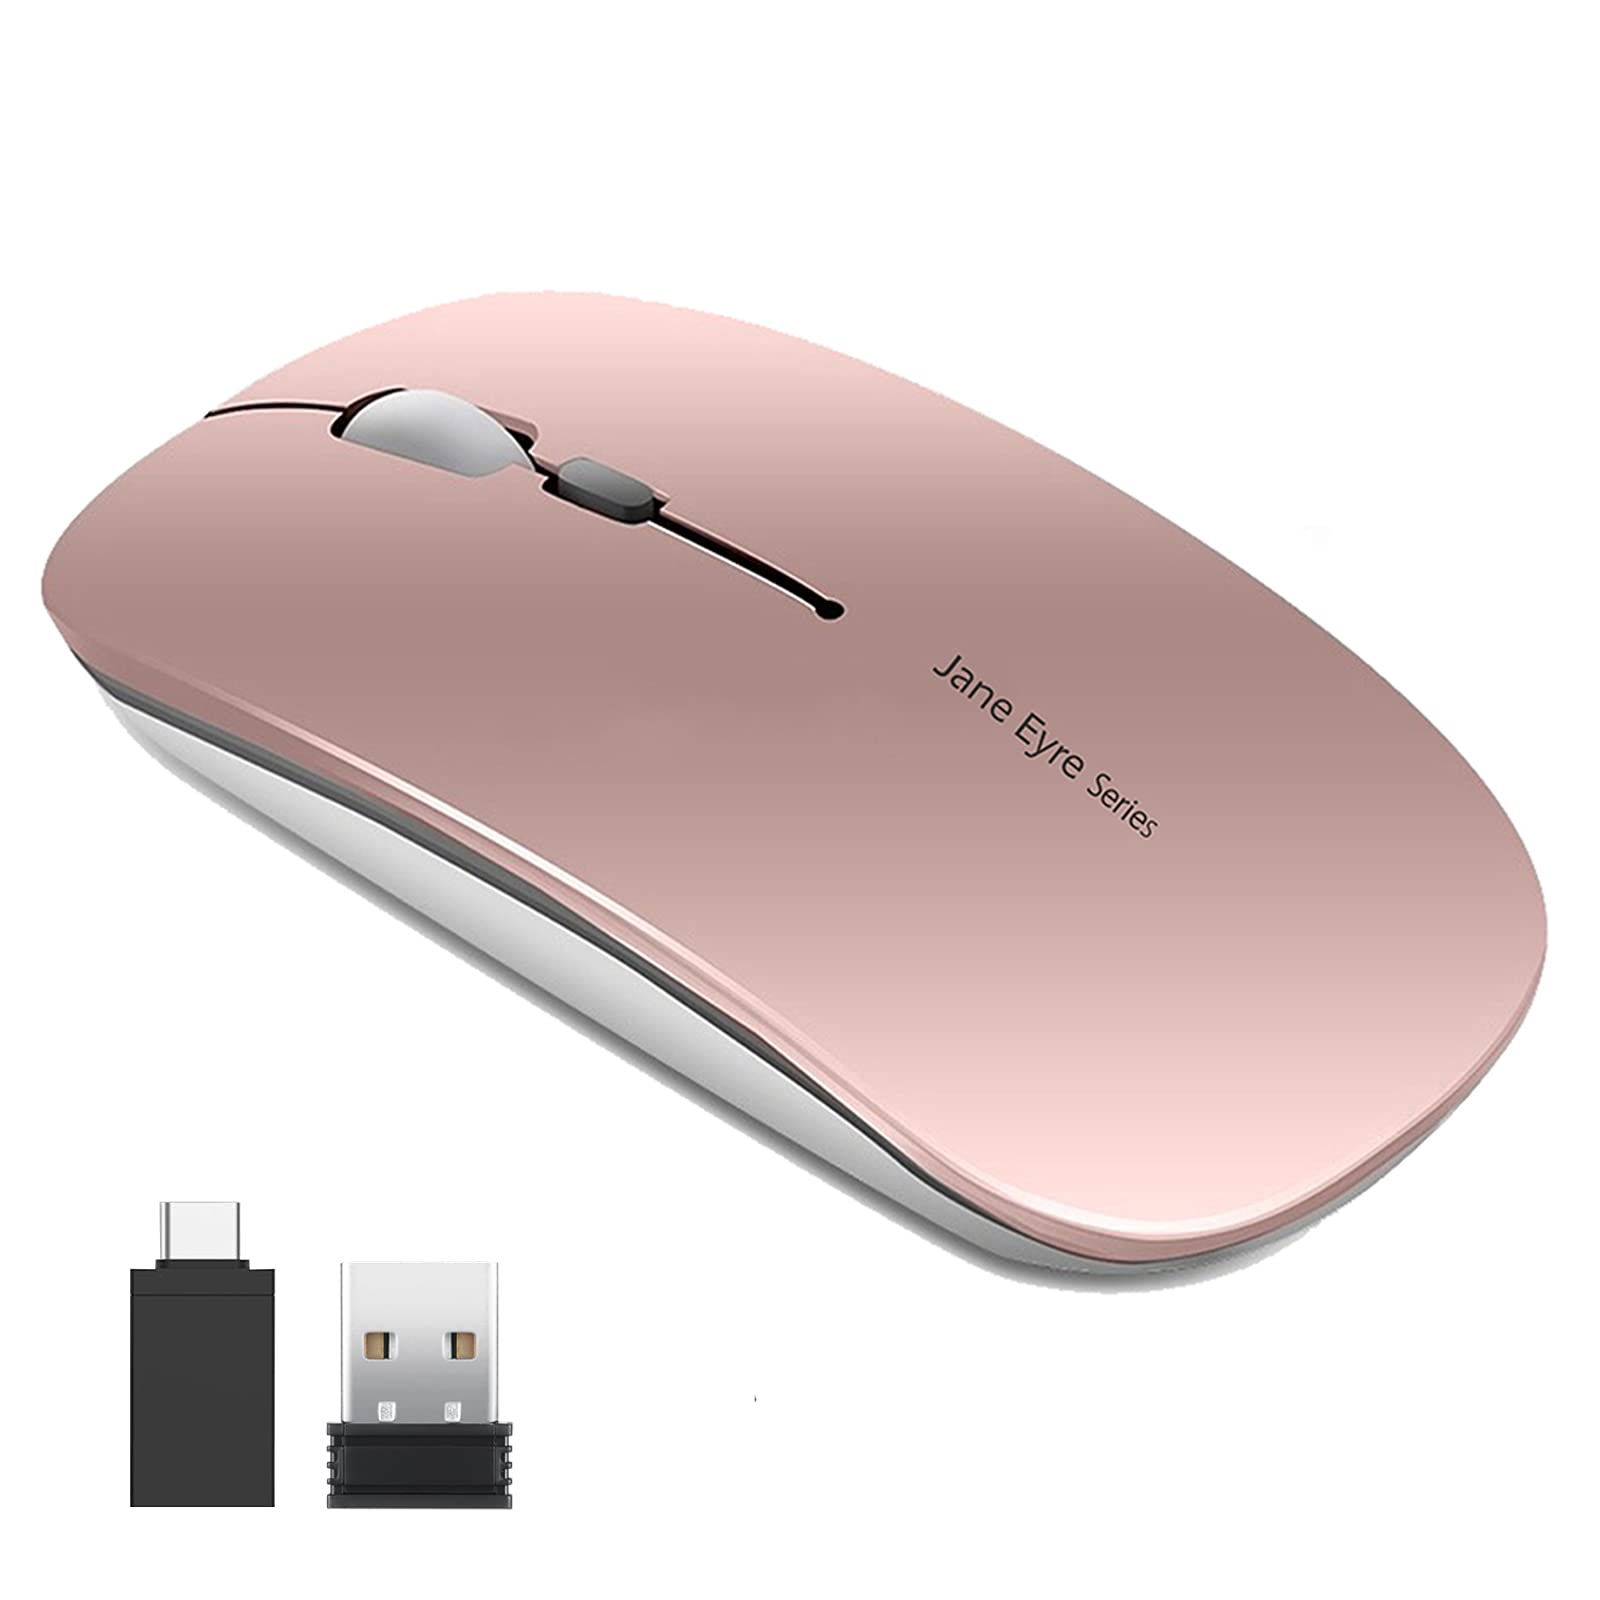 Ensure that the mouse cable is properly connected to the computer.
If you are using a wireless mouse, check the batteries and make sure they are not depleted.